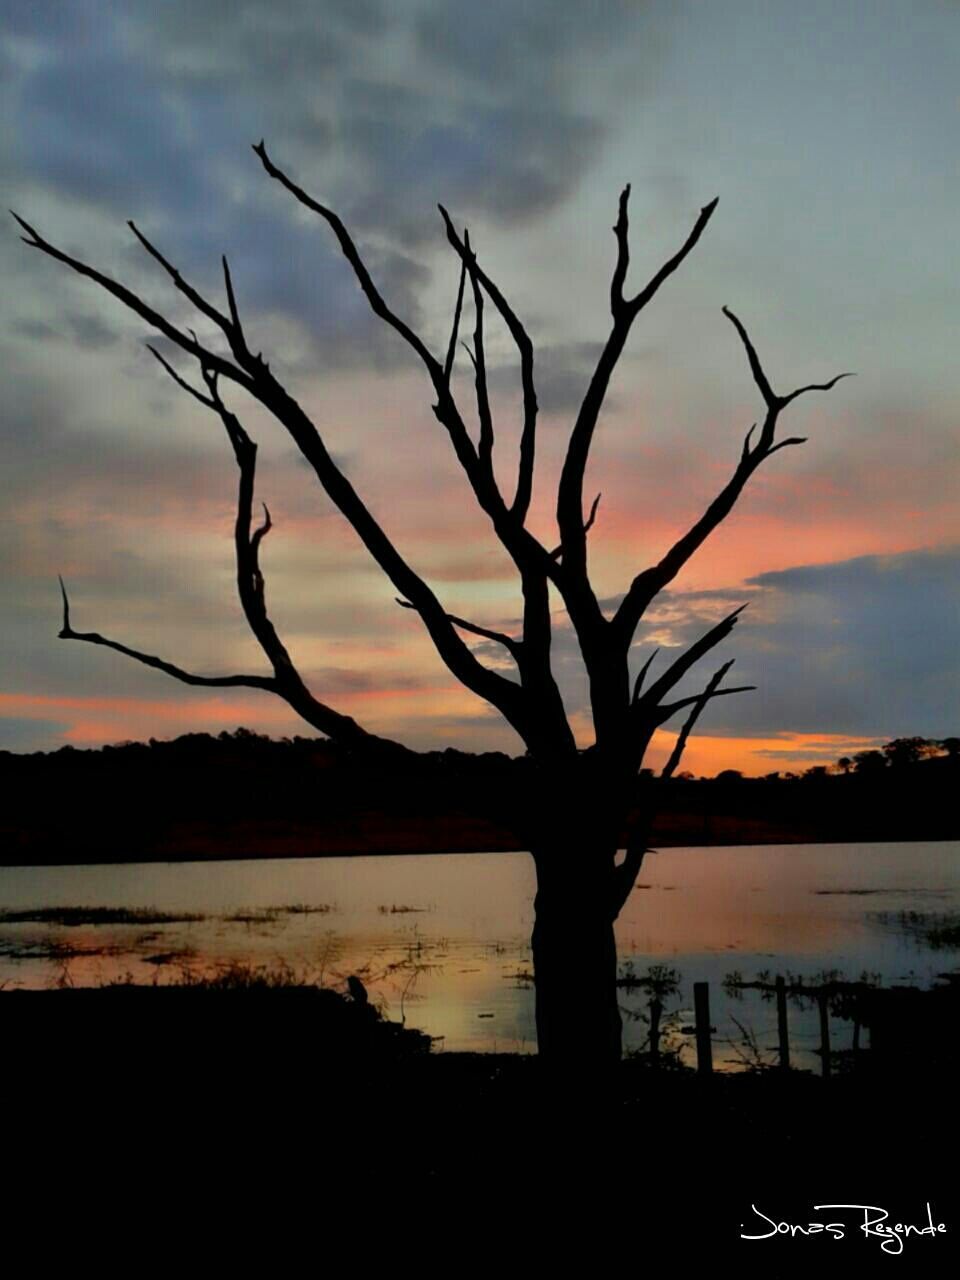 sunset, silhouette, water, tranquil scene, tranquility, scenics, sky, beauty in nature, bare tree, nature, branch, lake, idyllic, cloud - sky, tree, sea, lakeshore, reflection, tree trunk, cloud